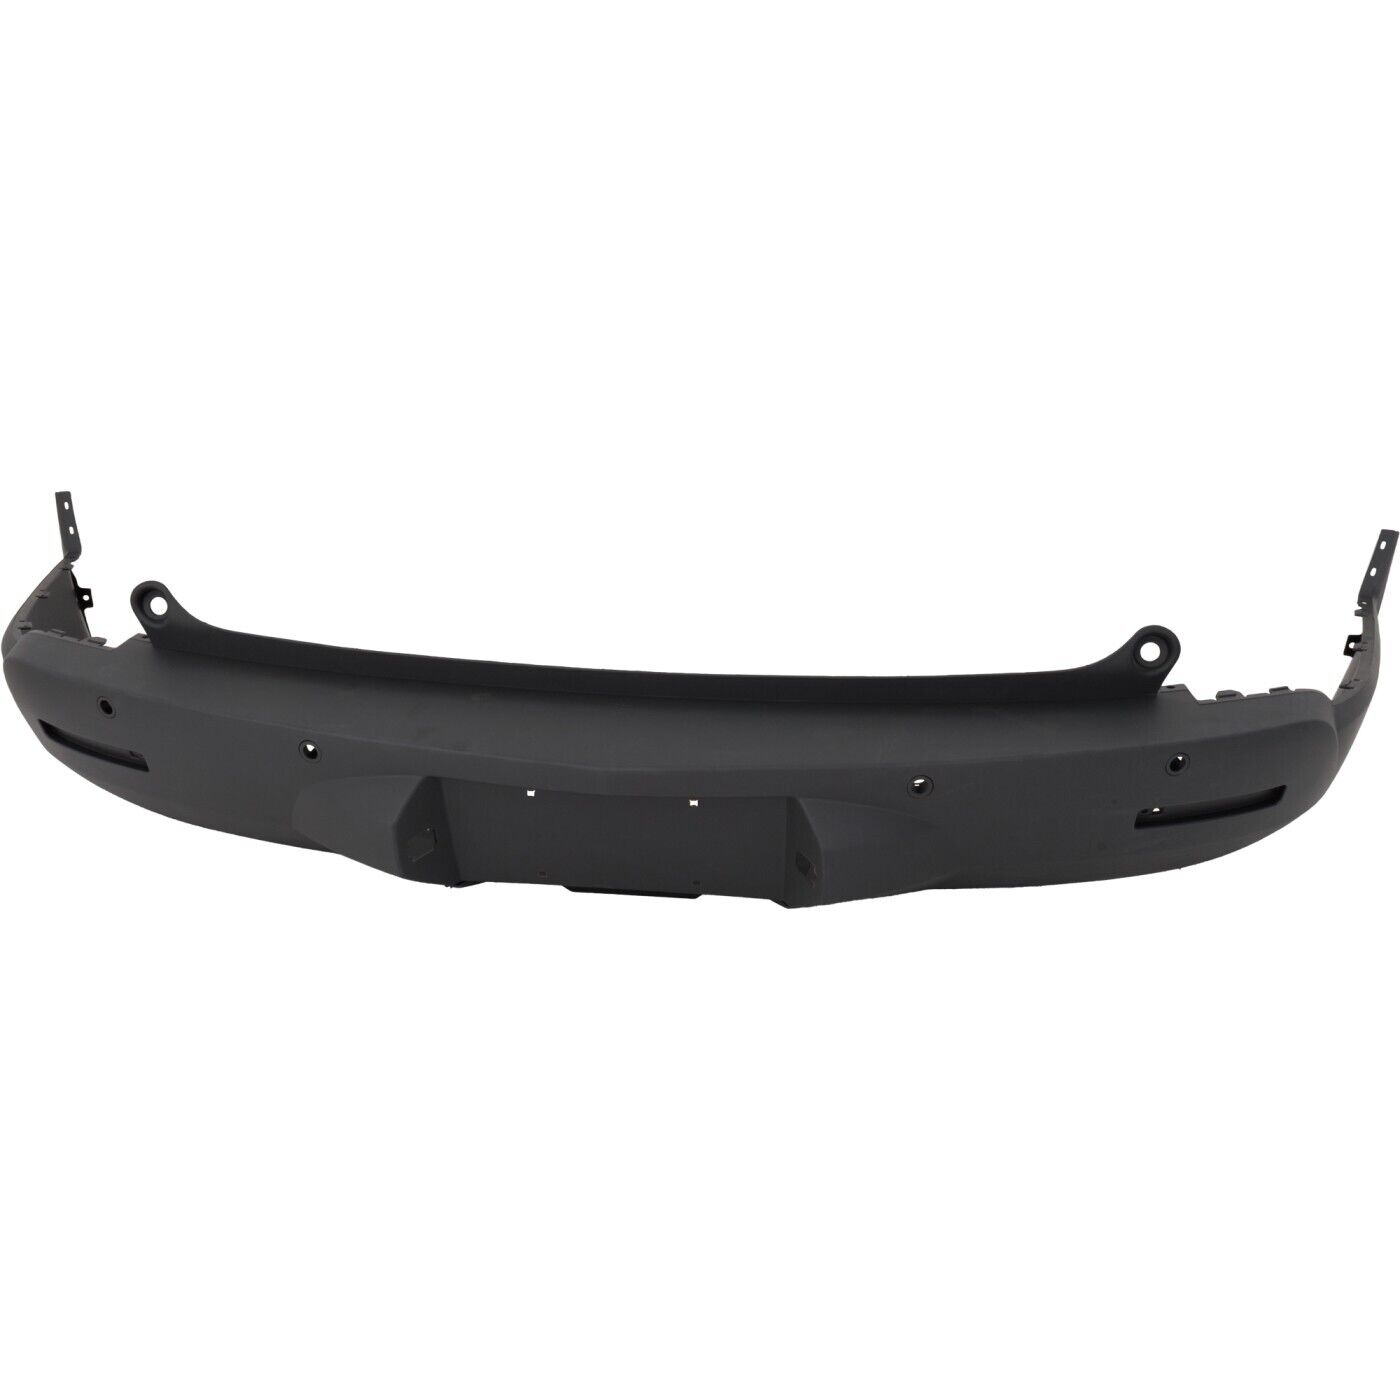 Bumper Cover For 2009-2012 Chevy Traverse Rear Plastic with Single Exhaust Hole